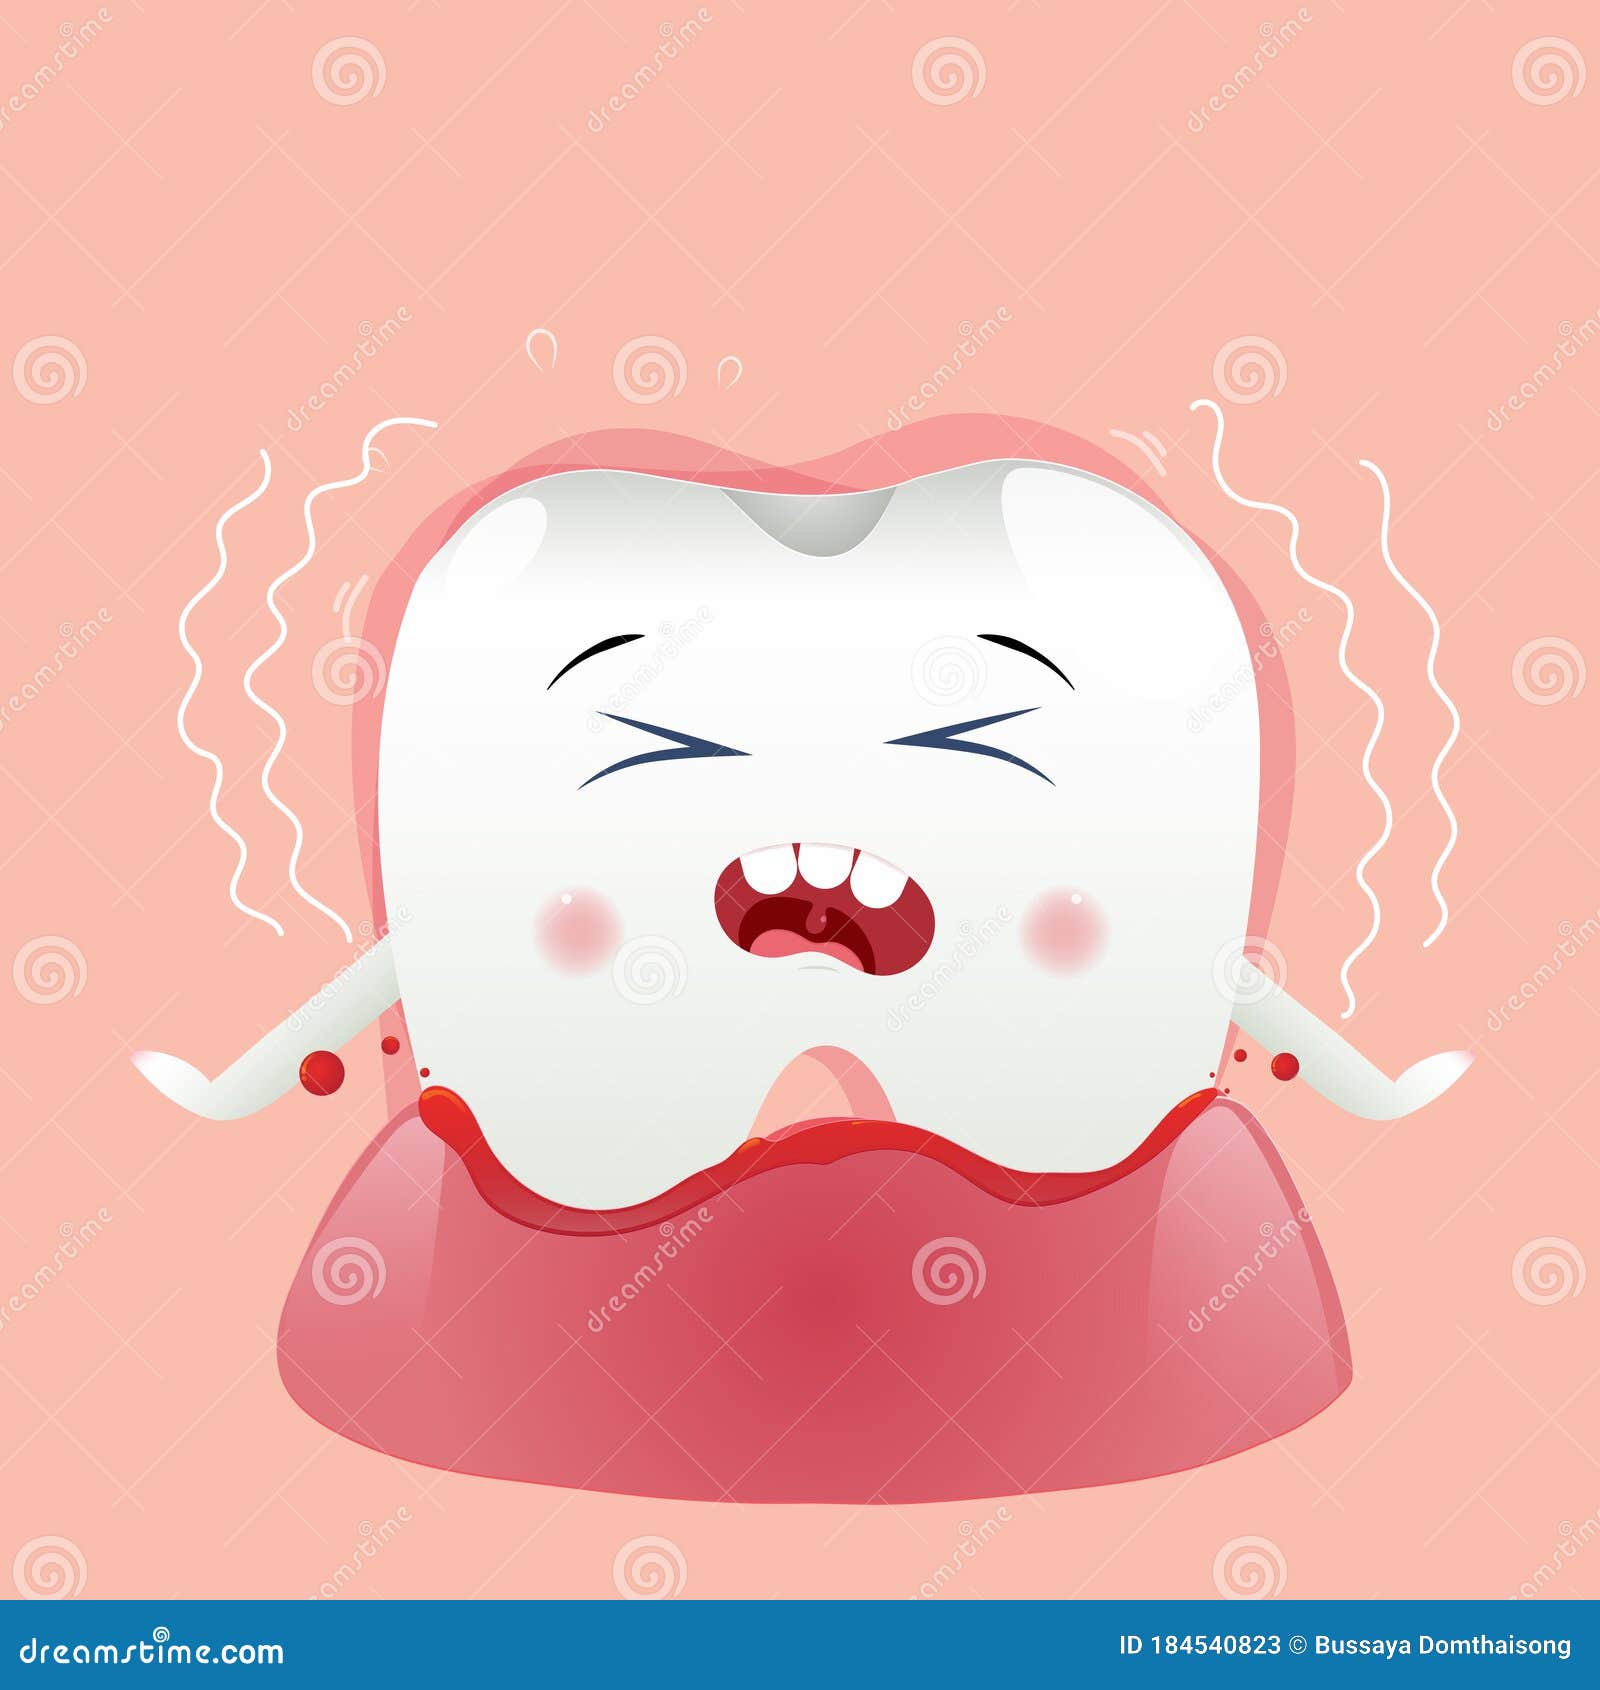 cute cartoon with the injured tooth causing bleeding and pain in the gums children dentistry concept.